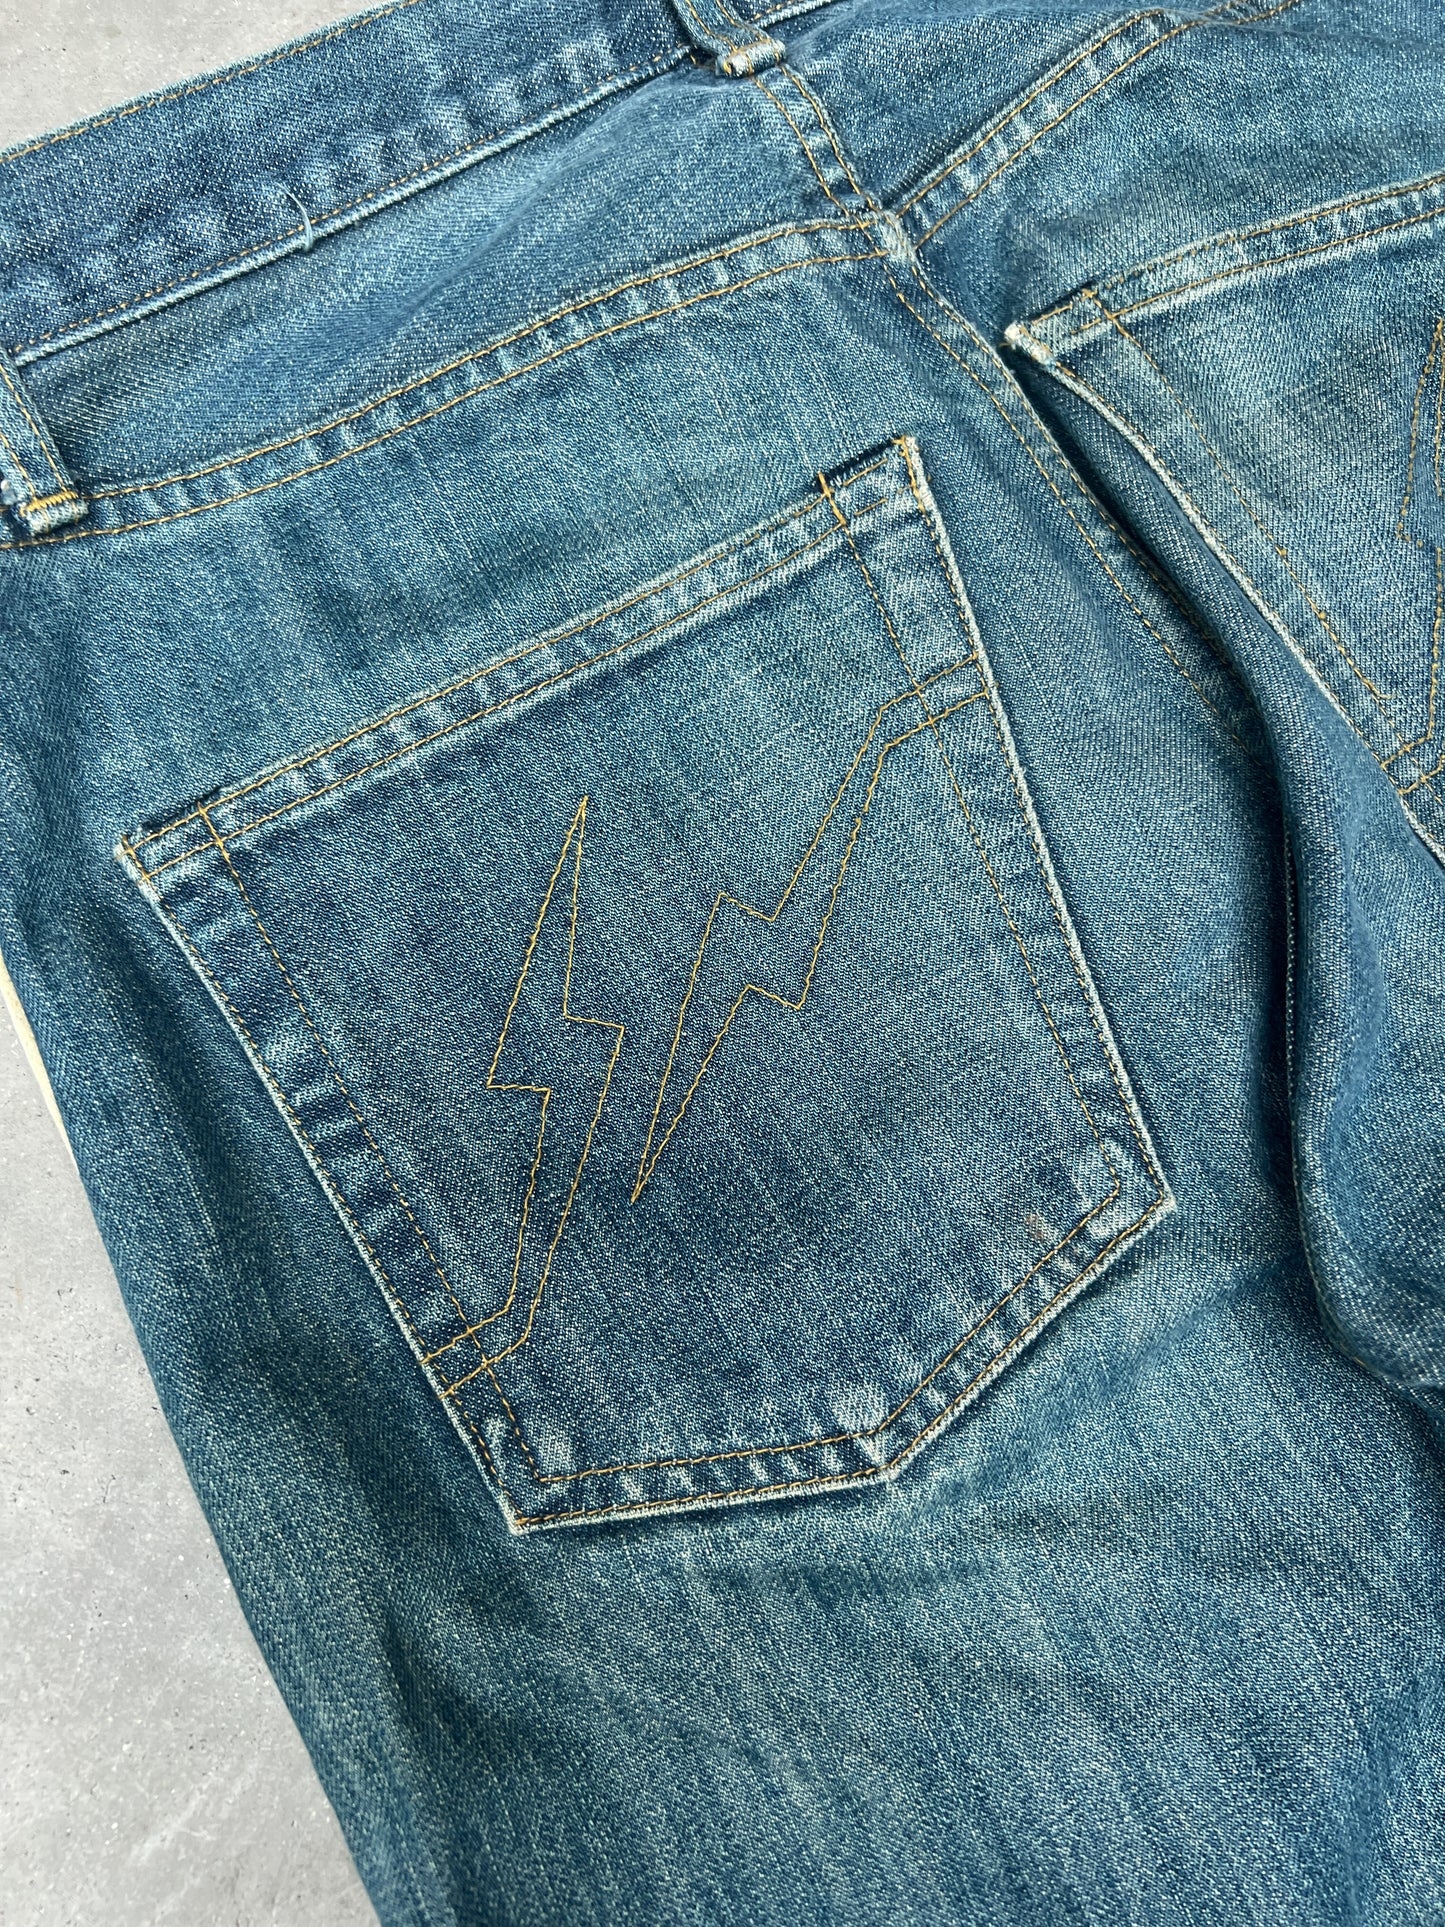 Undercover x Fragment AW02 Leather Side Stripe Denim Jeans